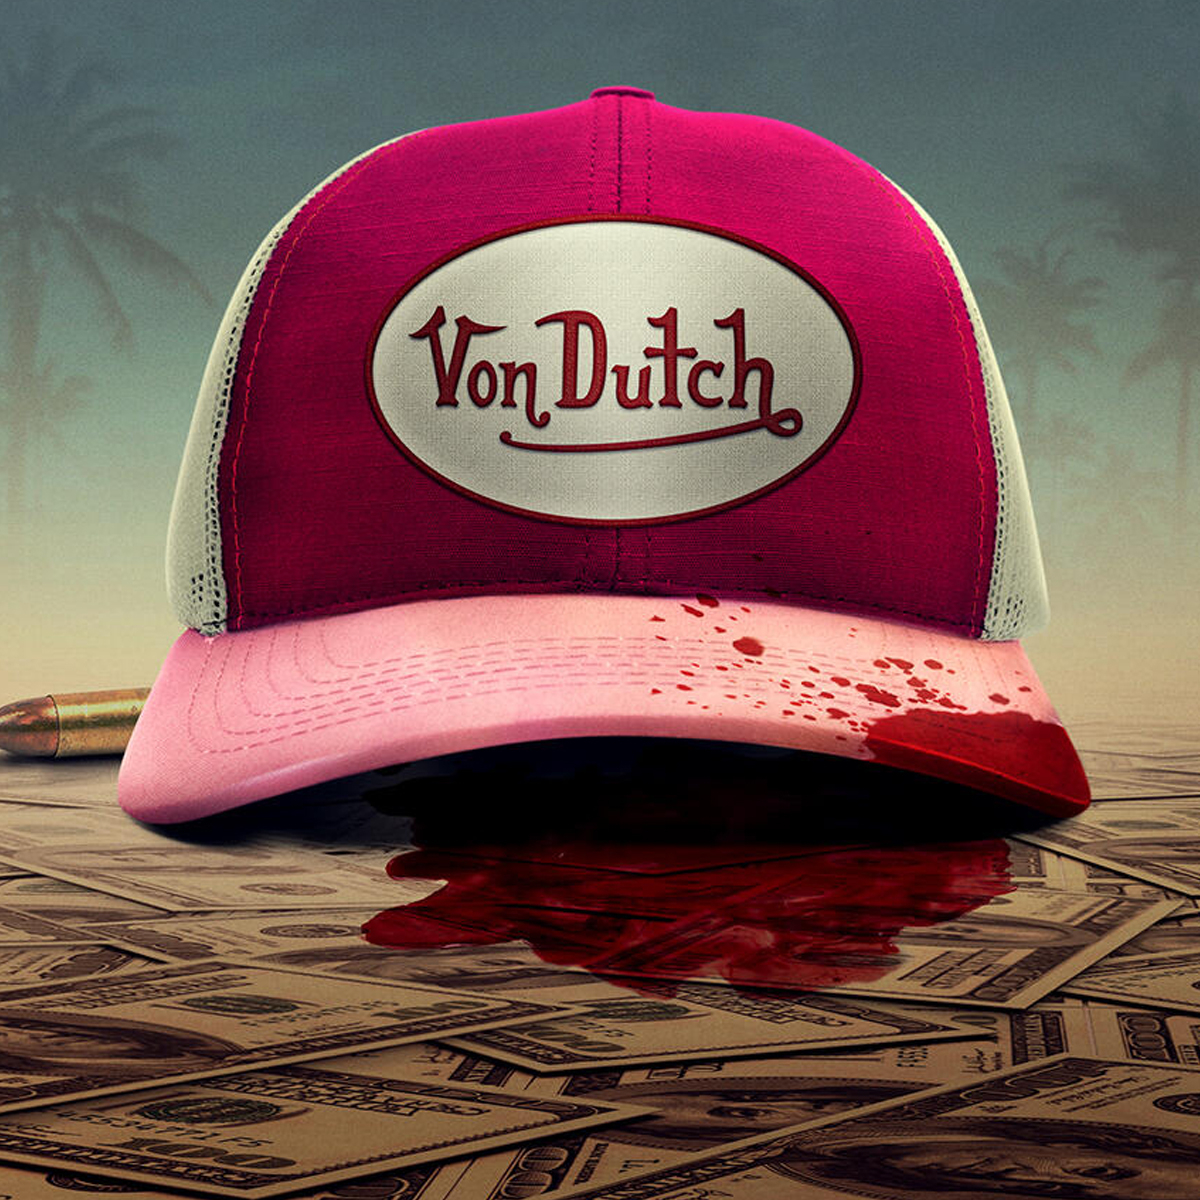 https://akns-images.eonline.com/eol_images/Entire_Site/2021104/rs_1200x1200-211104112846-1200-The-Curse-Of-Von-Dutch-LT-11421-Hulu.jpg?fit=around%7C1080:1080&output-quality=90&crop=1080:1080;center,top